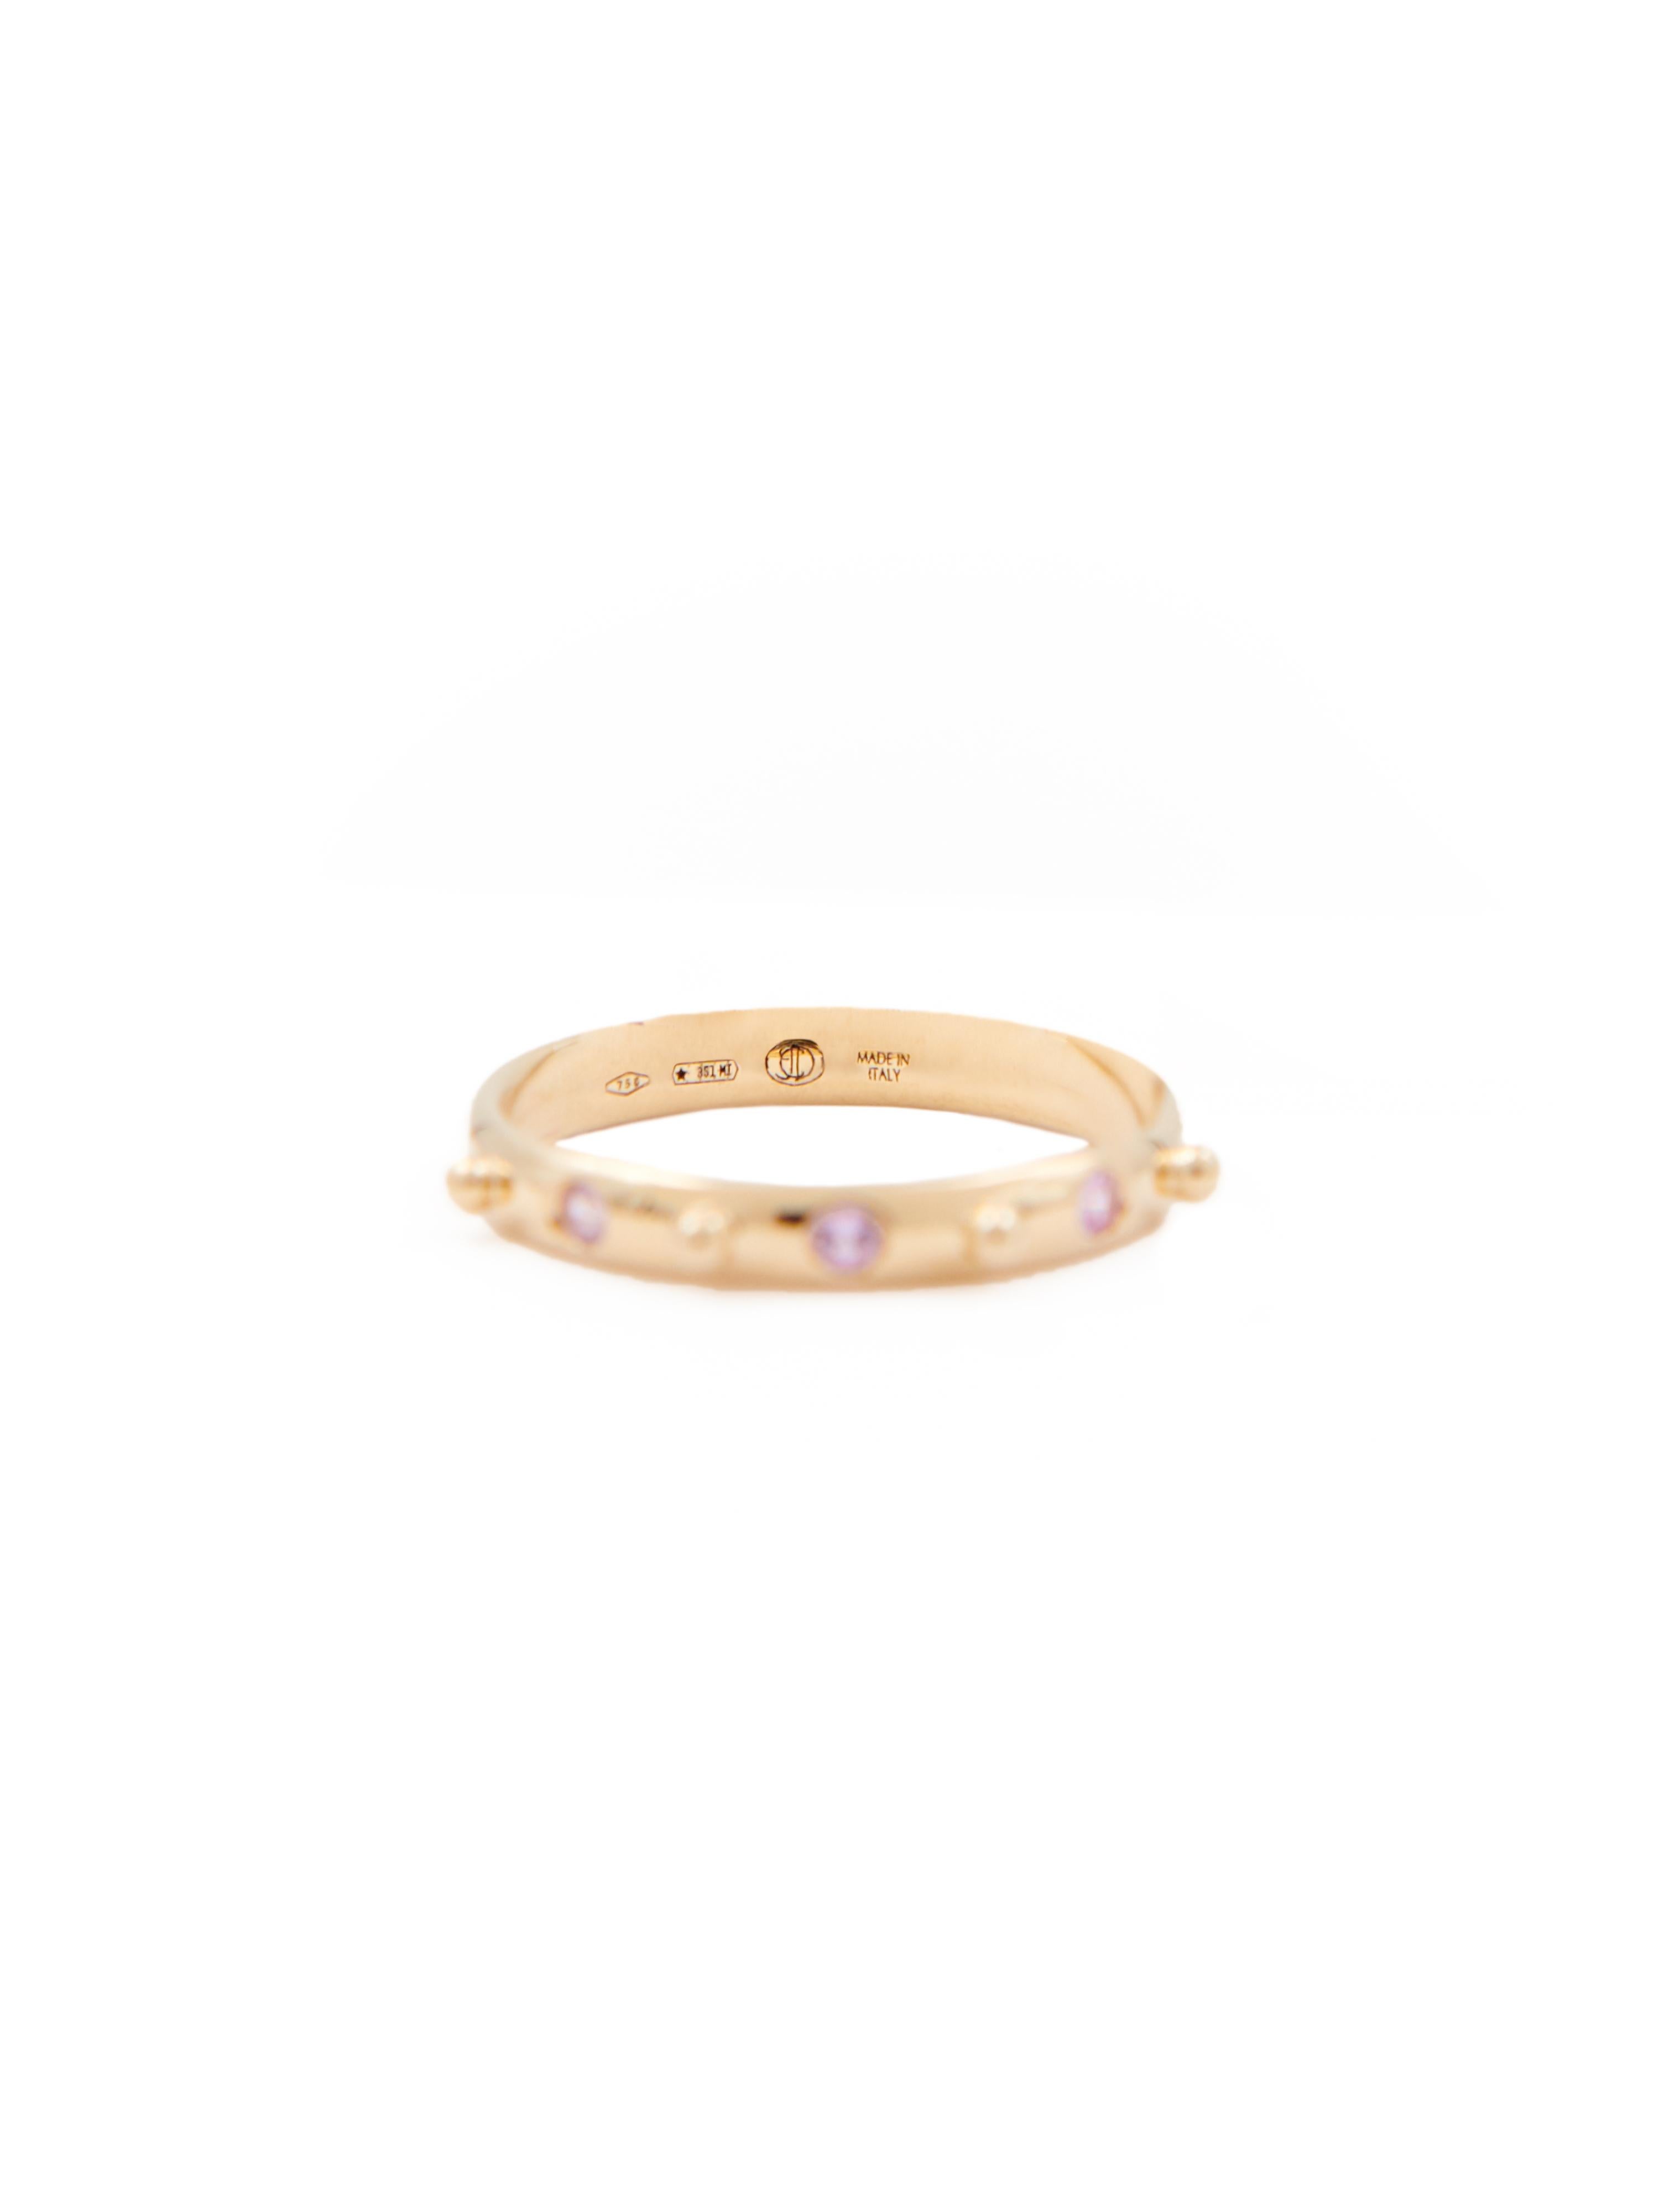 18 karat yellow gold stacking ring with three pink sapphires.  
  
This ring is available in three sizes (Italian sizes 12, 14 and 16 / US sizes 6, 6 3/4 and 7 1/2)

Perfect worn alone or for stacking with the other stacking rings in the Mezzanotte